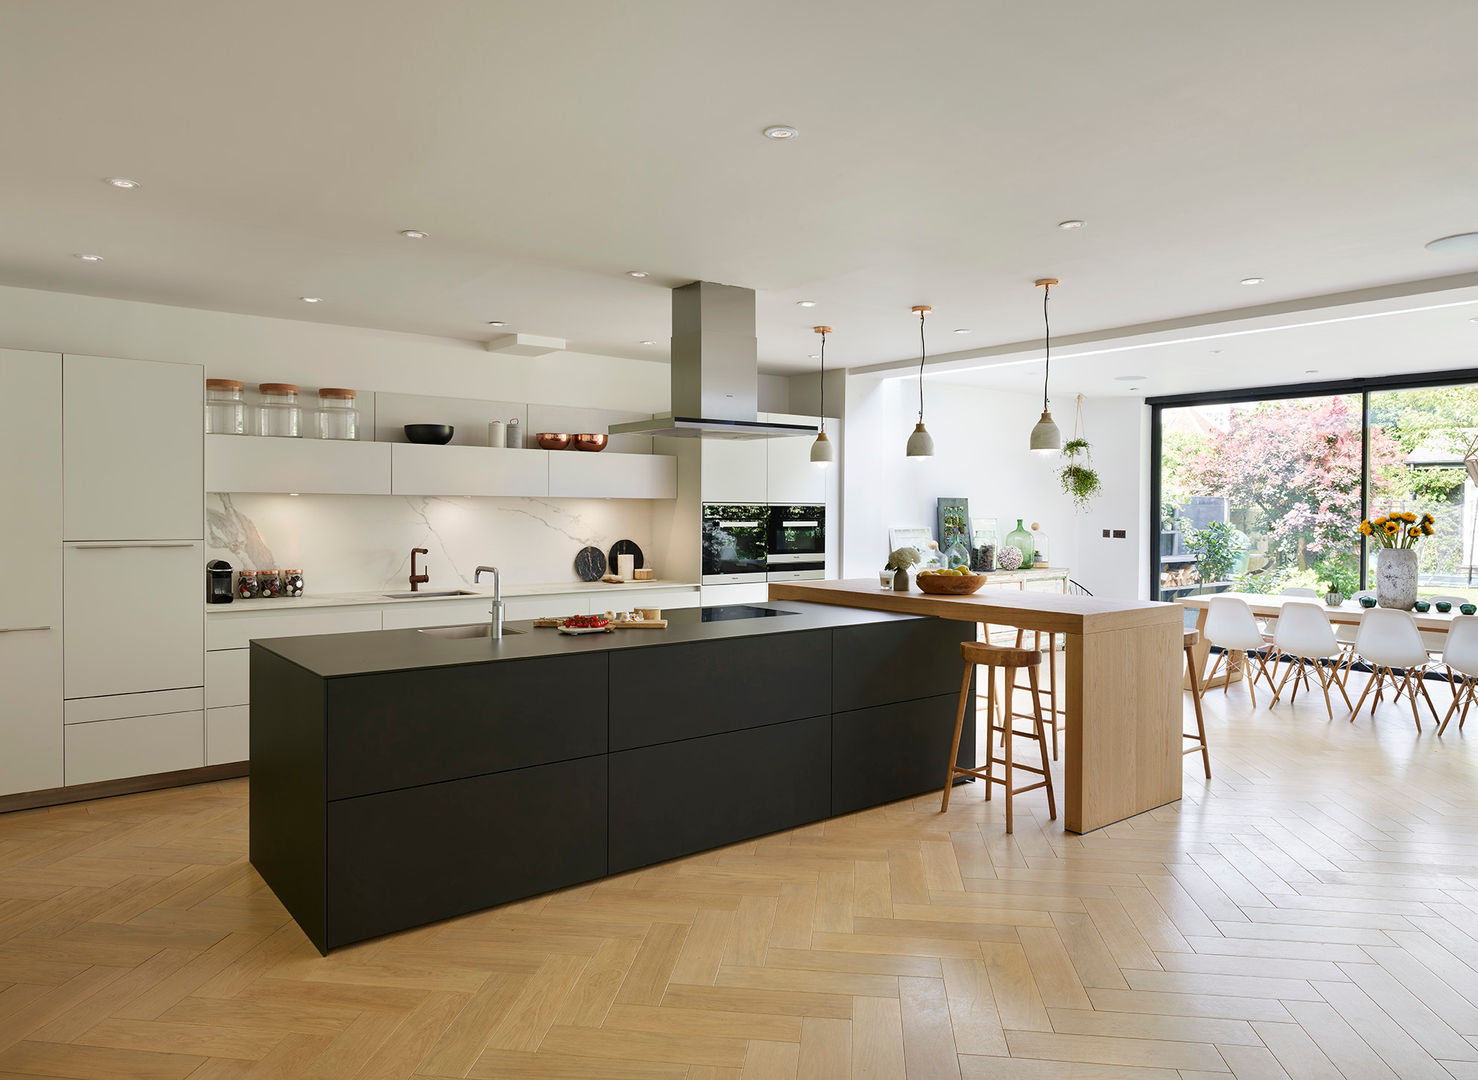 Combined elegance Kitchen Architecture Cocinas modernas kitchen architecture,bulthaup,bulthaup b3,bespoke kitchen,contemporary kitchen,kitchen island,breakfast bar,contrasting tones,white kitchen,kitchen dining,integrated kitchen,open plan kitchjen